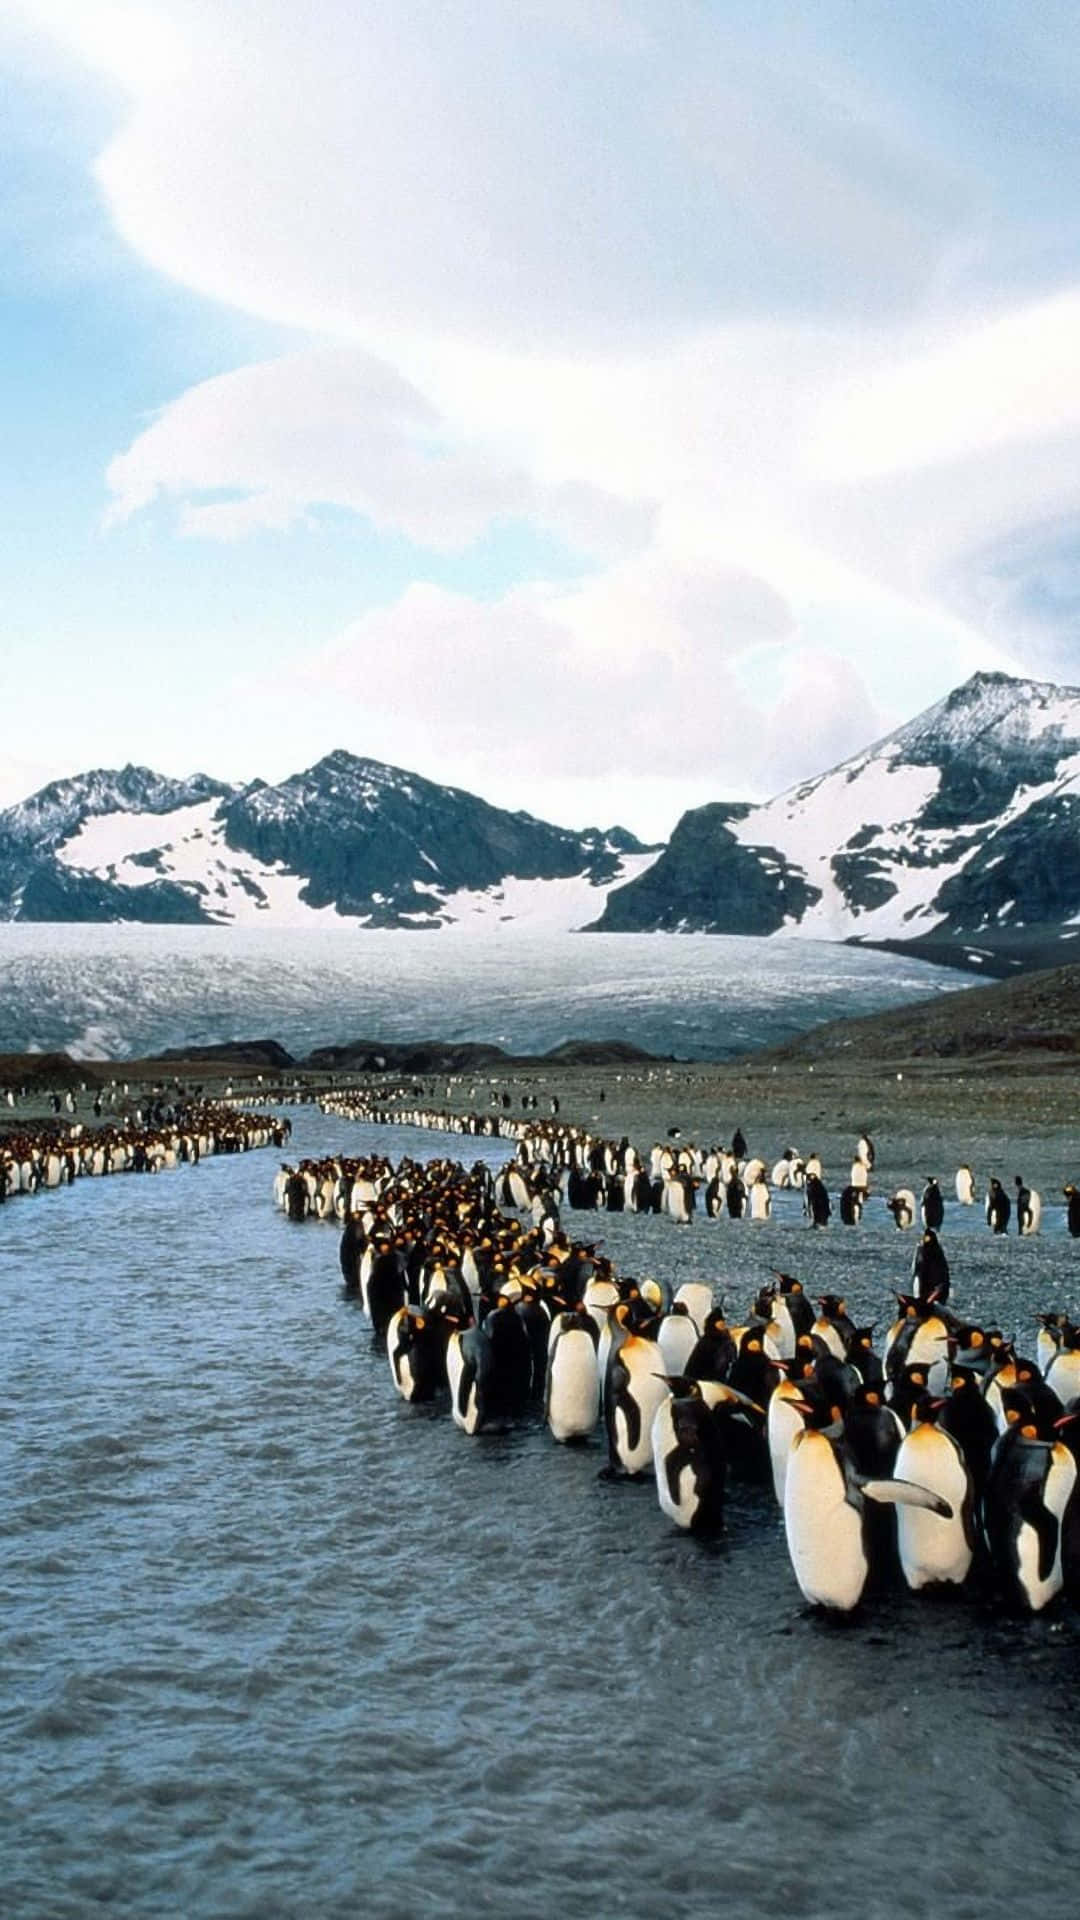 King Penguins Marching Snowy Mountains Wallpaper